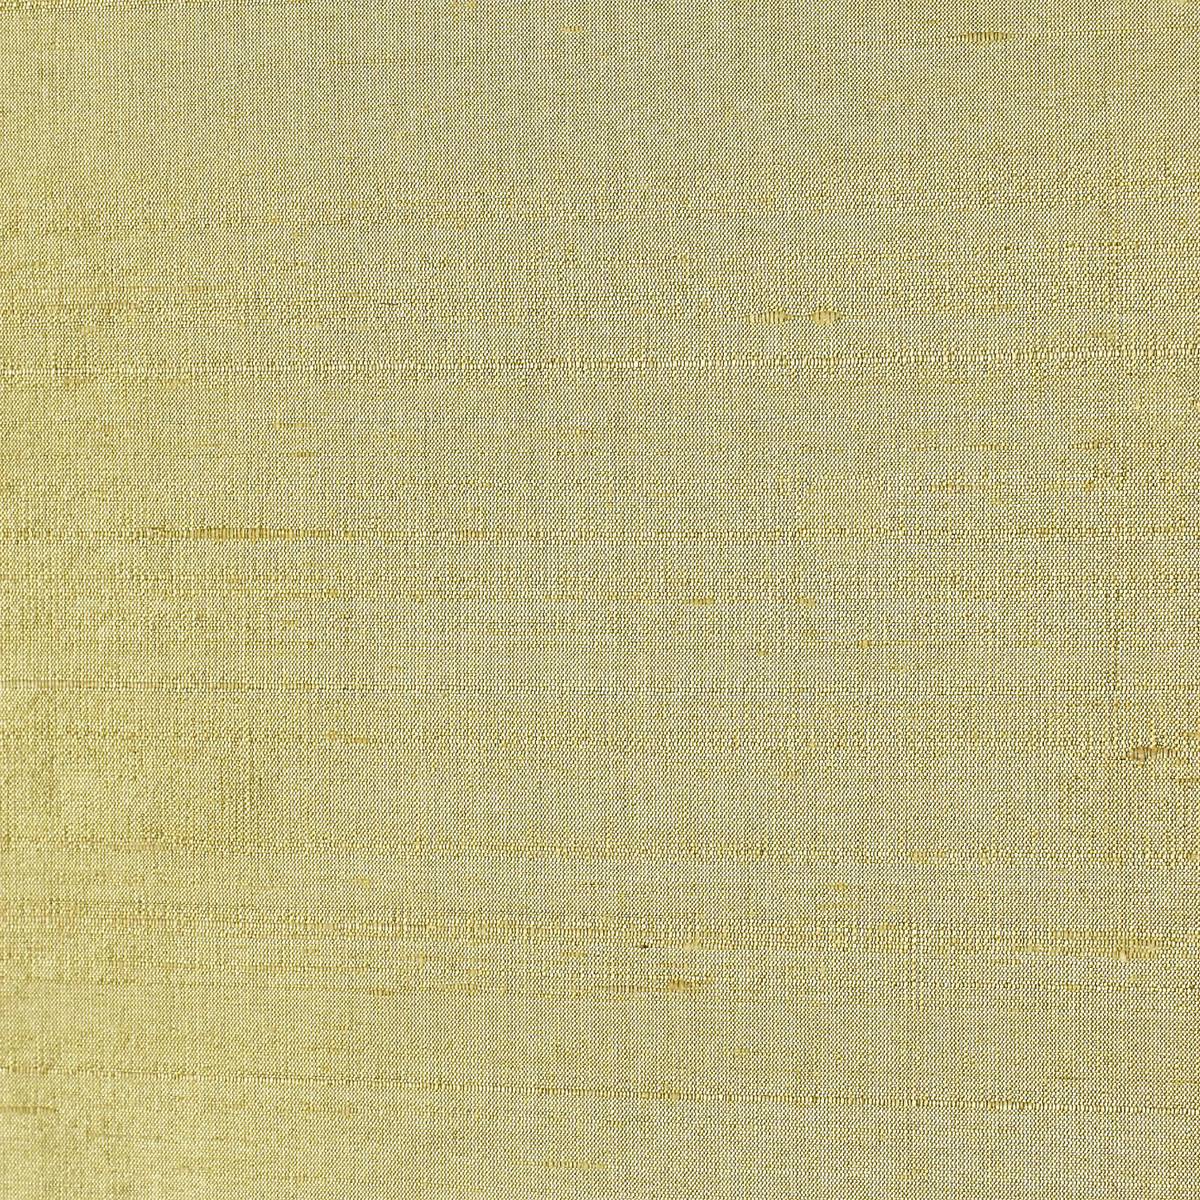 Lilaea Silks Seagrass Fabric by Harlequin